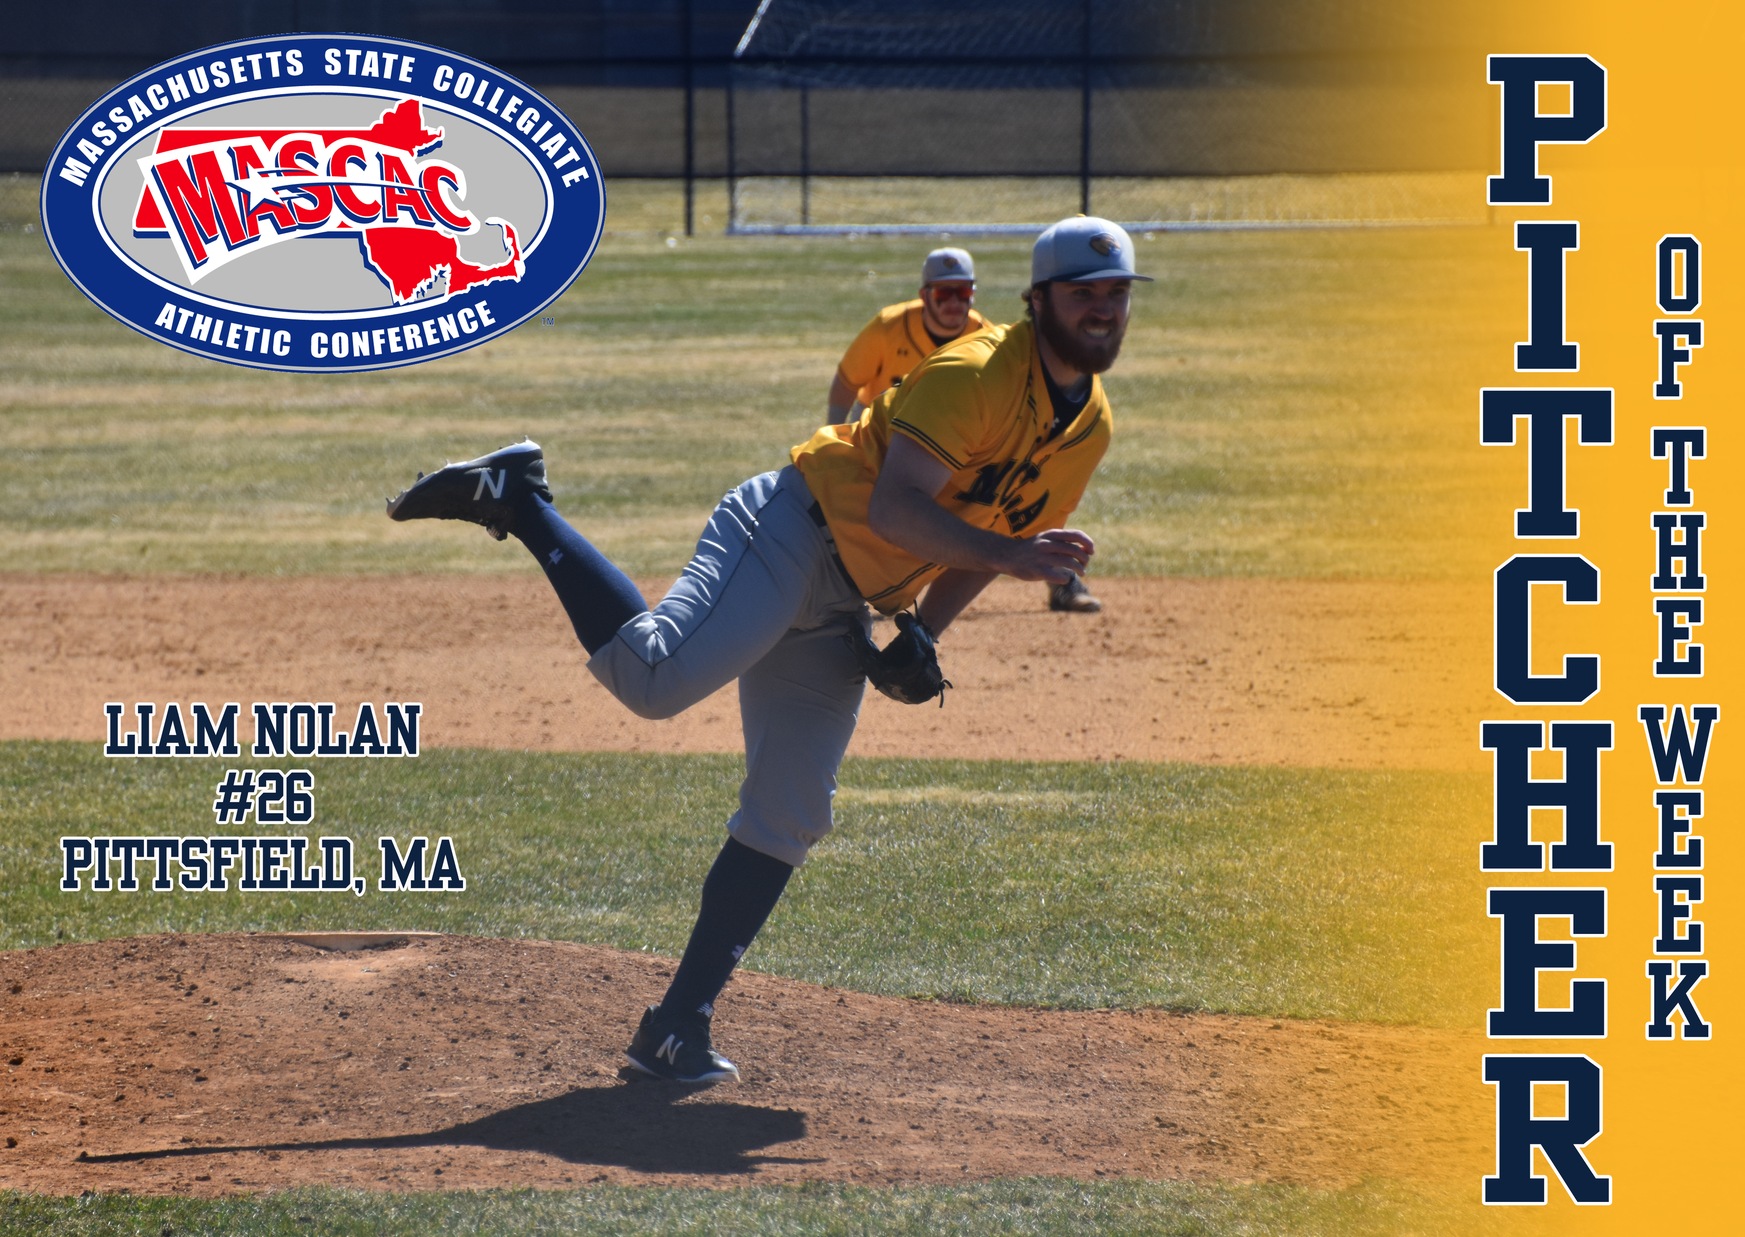 Nolan tabbed as MASCAC Pitcher of the Week after shutting out Framingham State